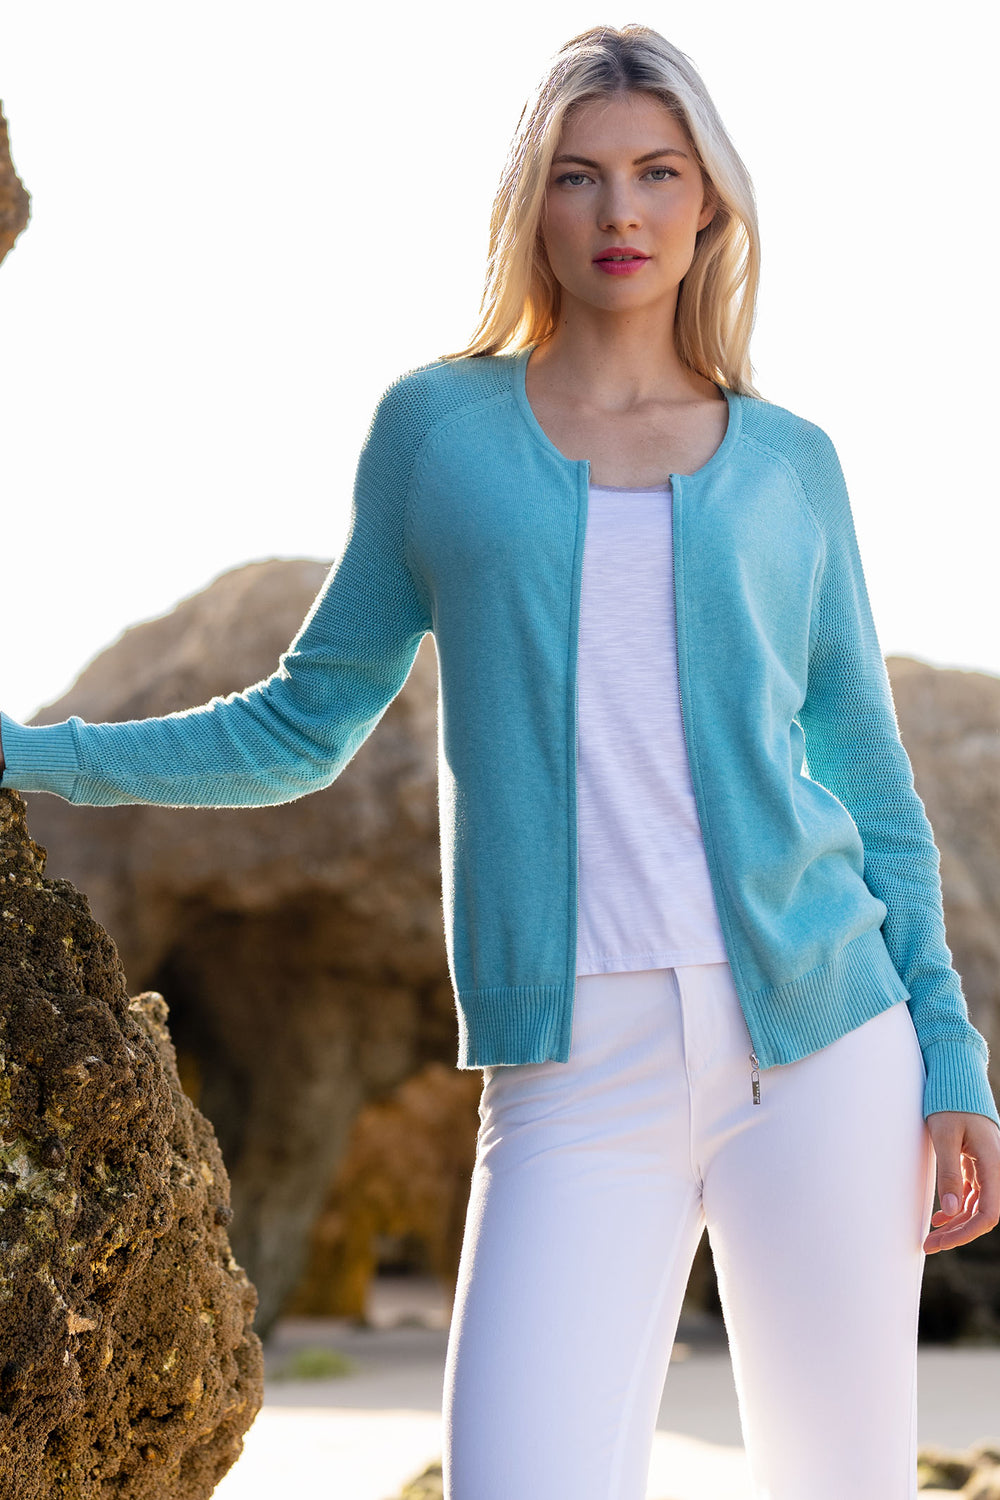 Marble Fashions 7354 151 Aqua Blue Zip Front Cardigan - Experience Boutique